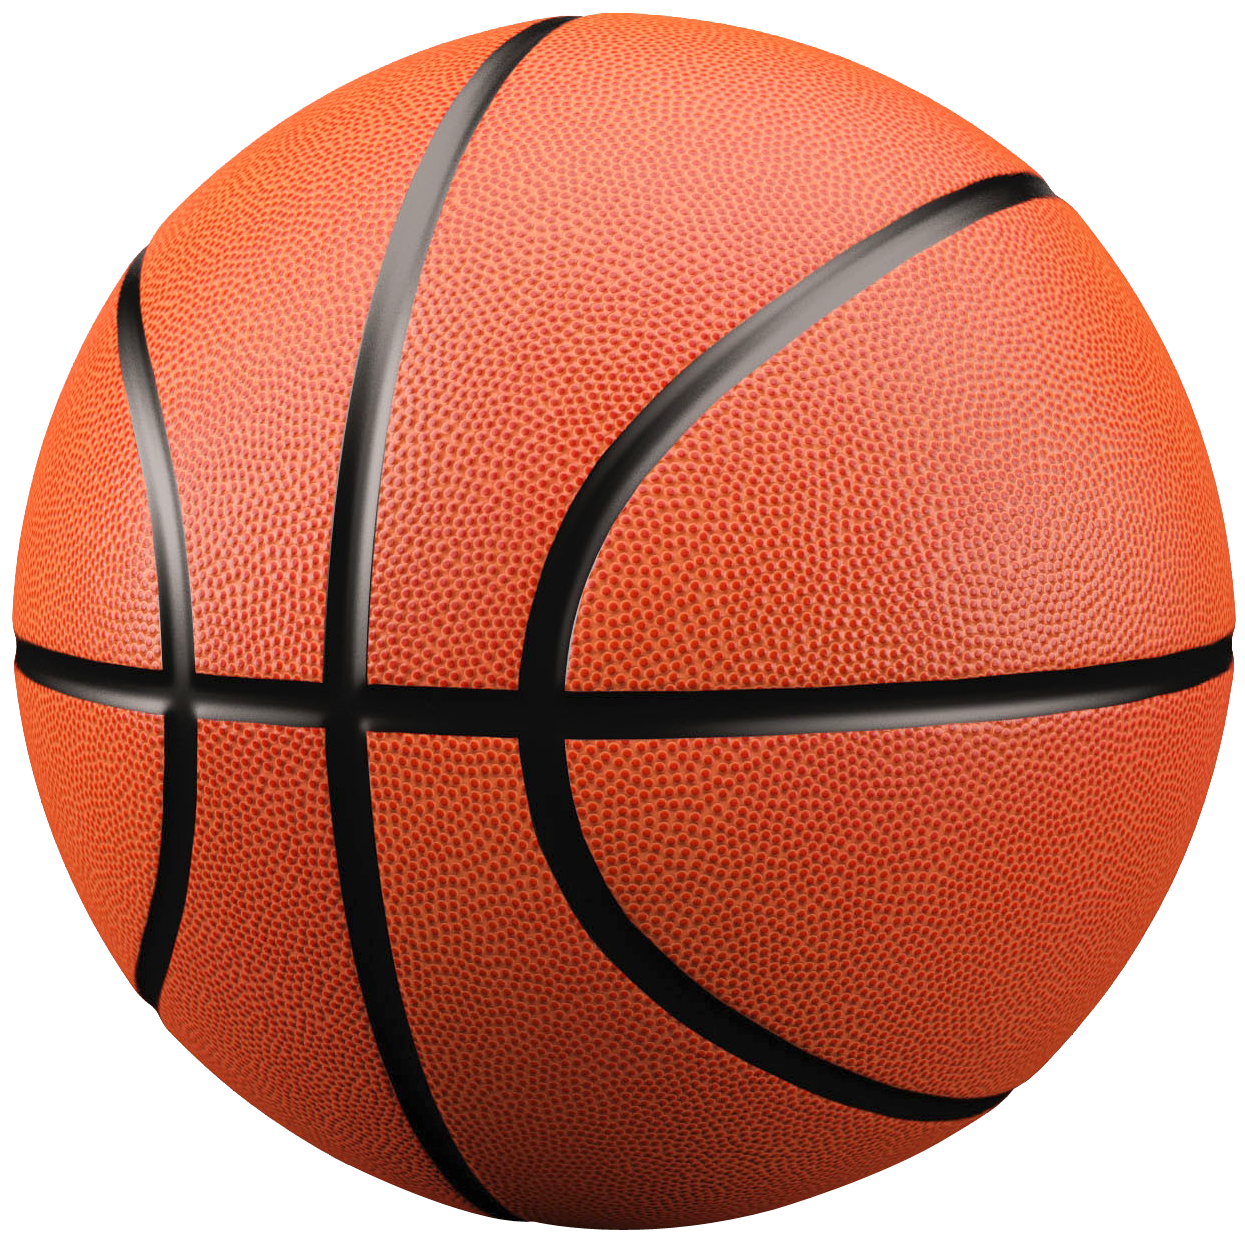 Collection Of Basketball Hd Png Pluspng